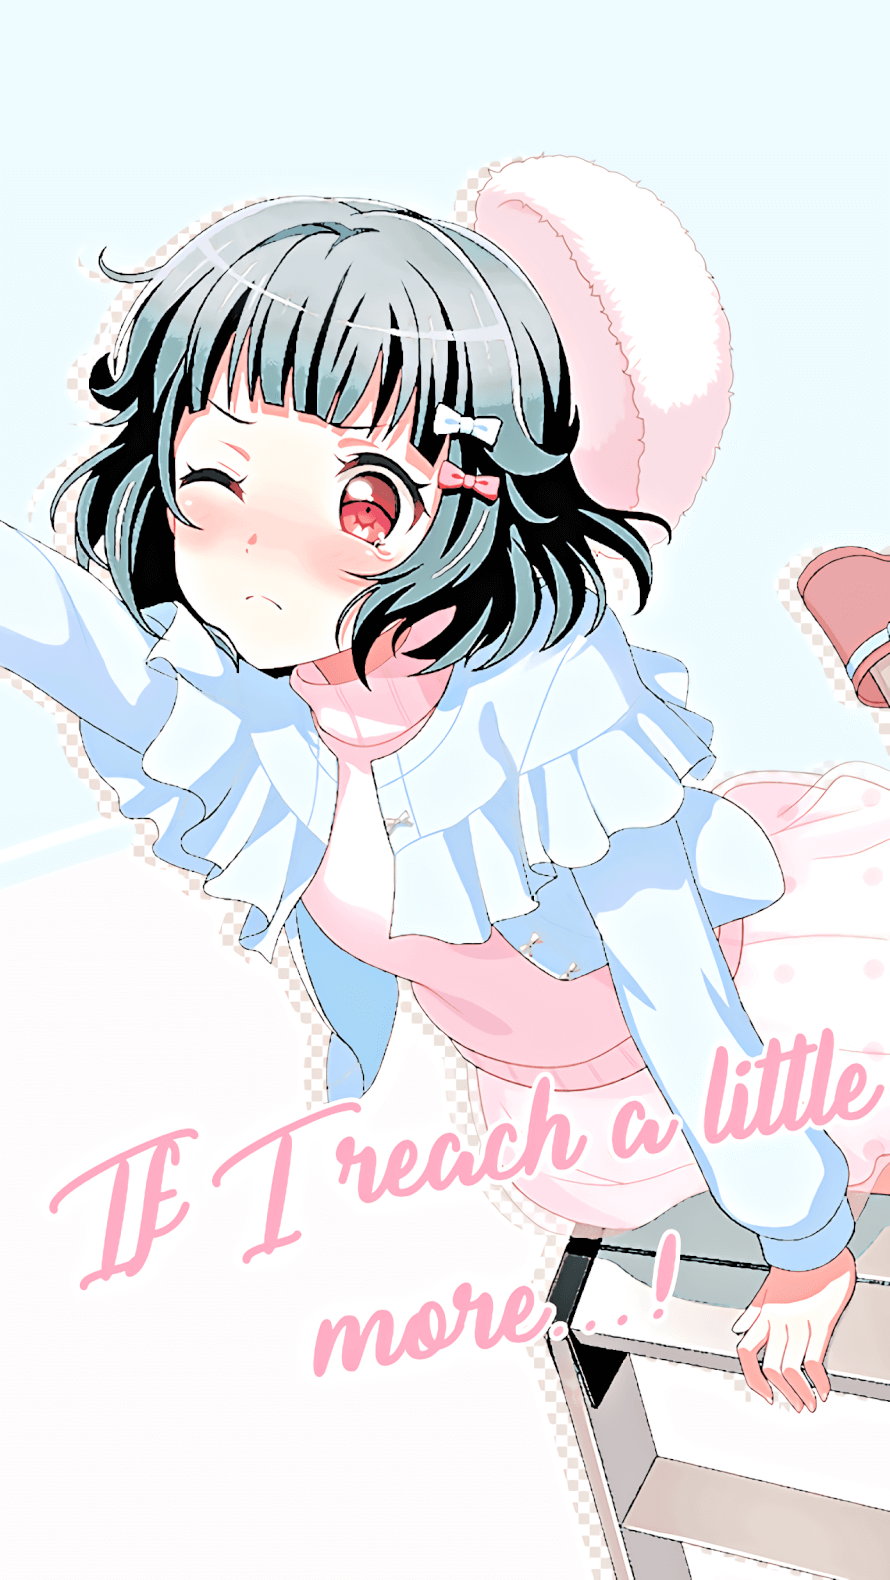 i had a dream it was rimi's bday today so I ended up waking up and making edits for her but I also...